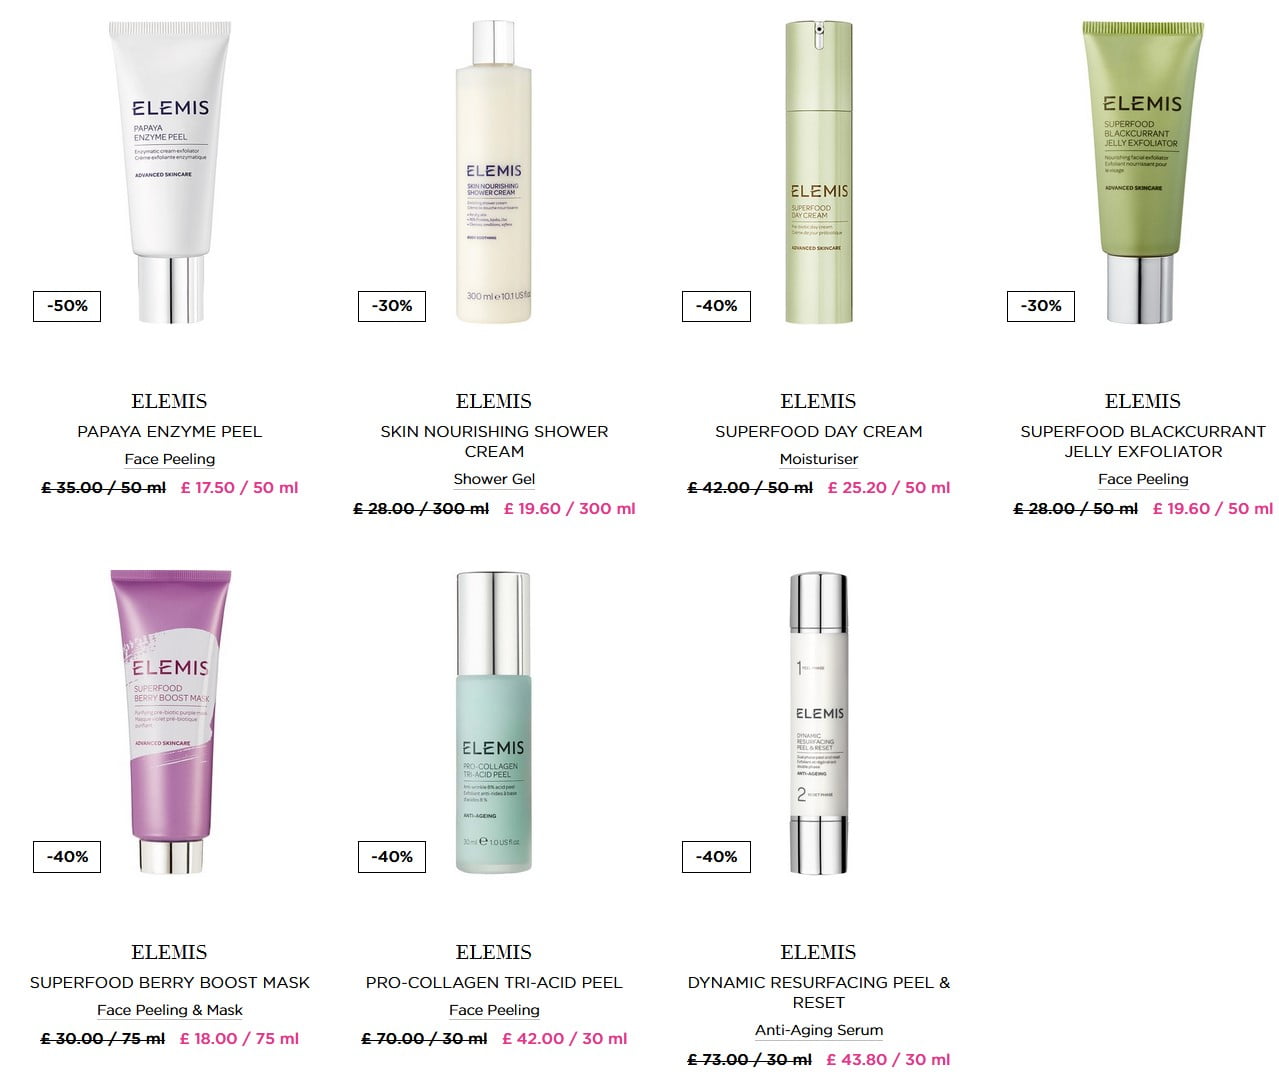 Up to 50% off Elemis at Niche Beauty